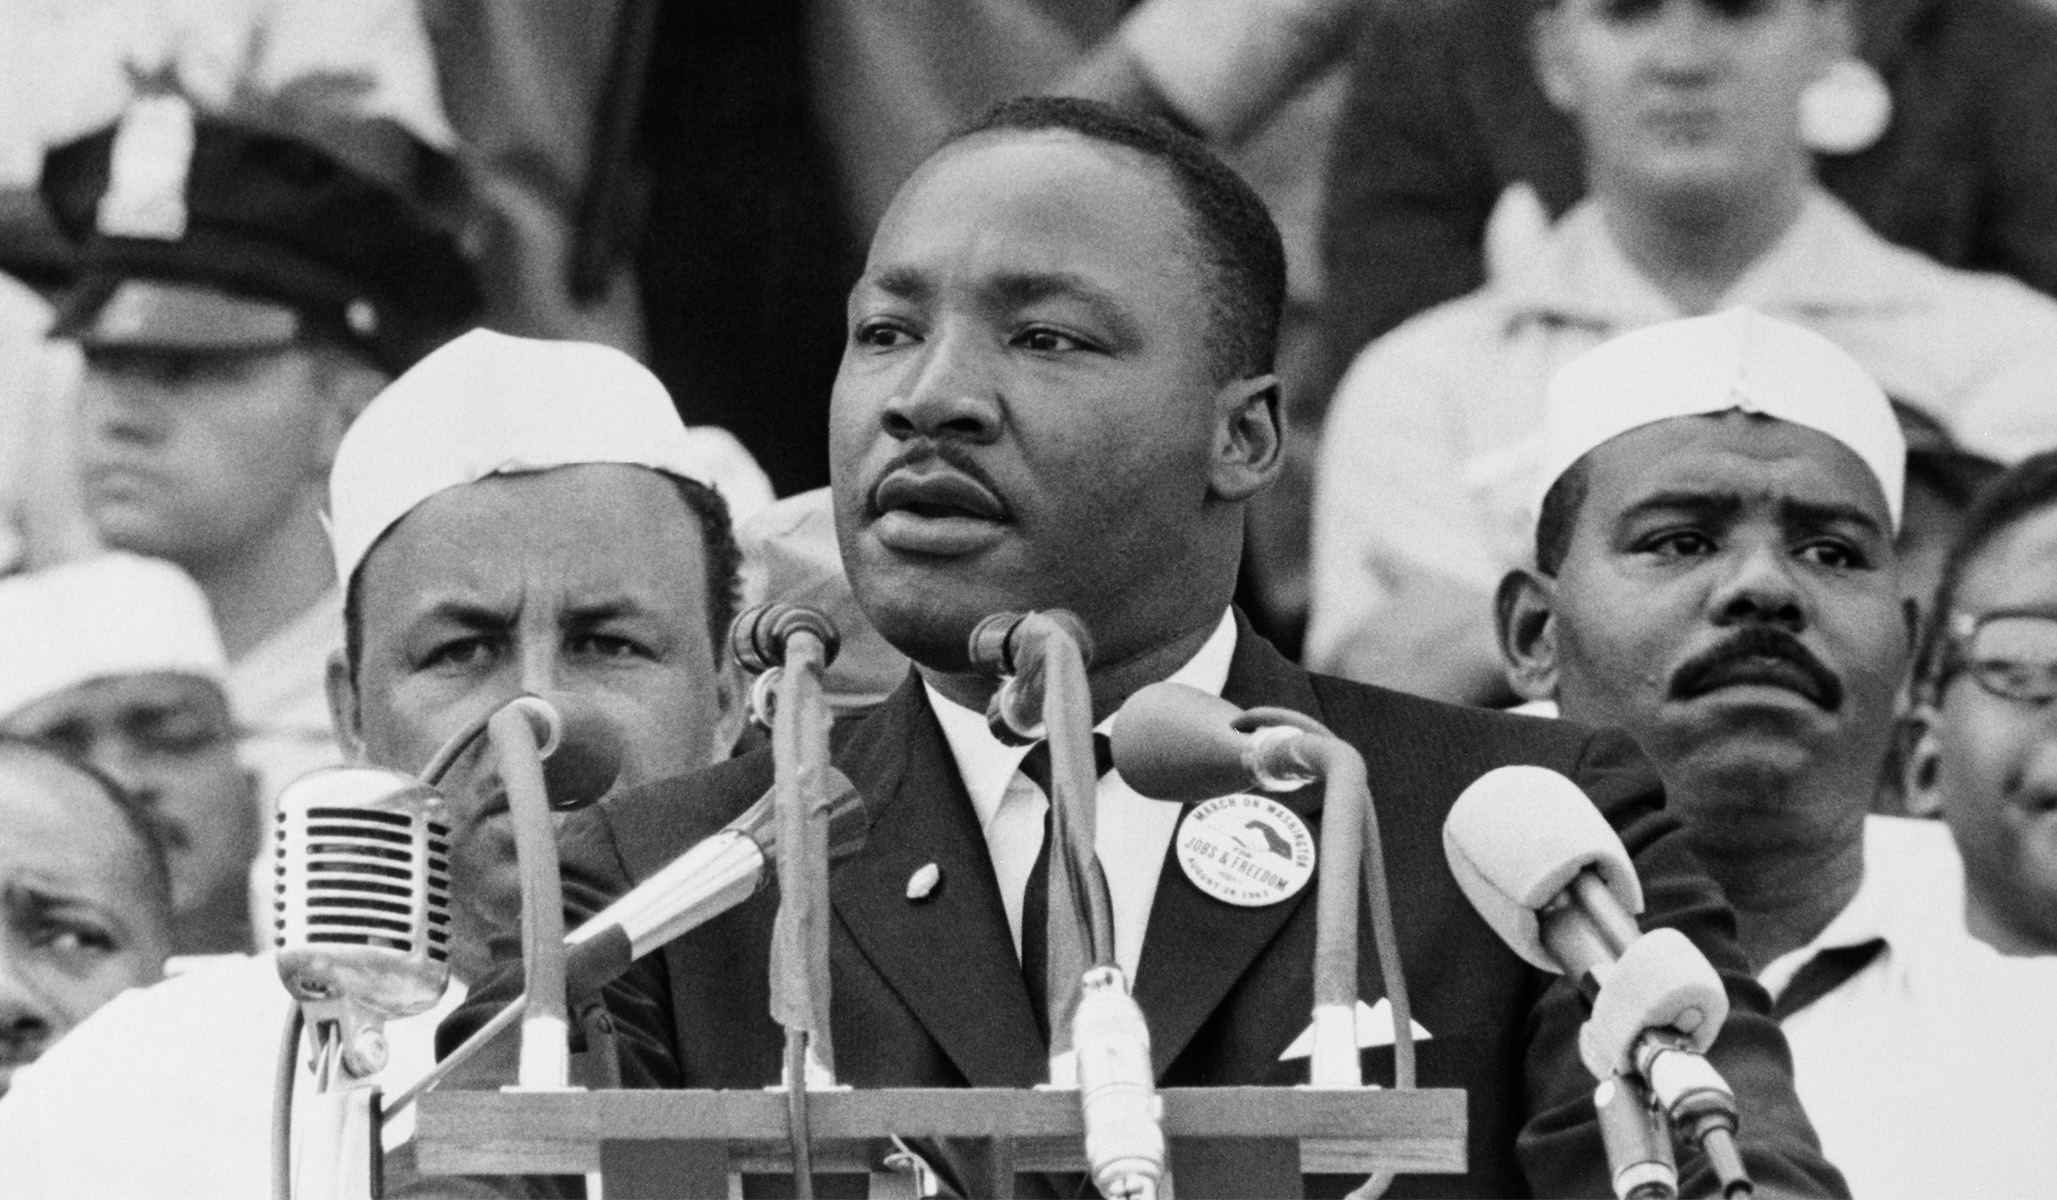 Why We Celebrate Martin Luther King, Jr.